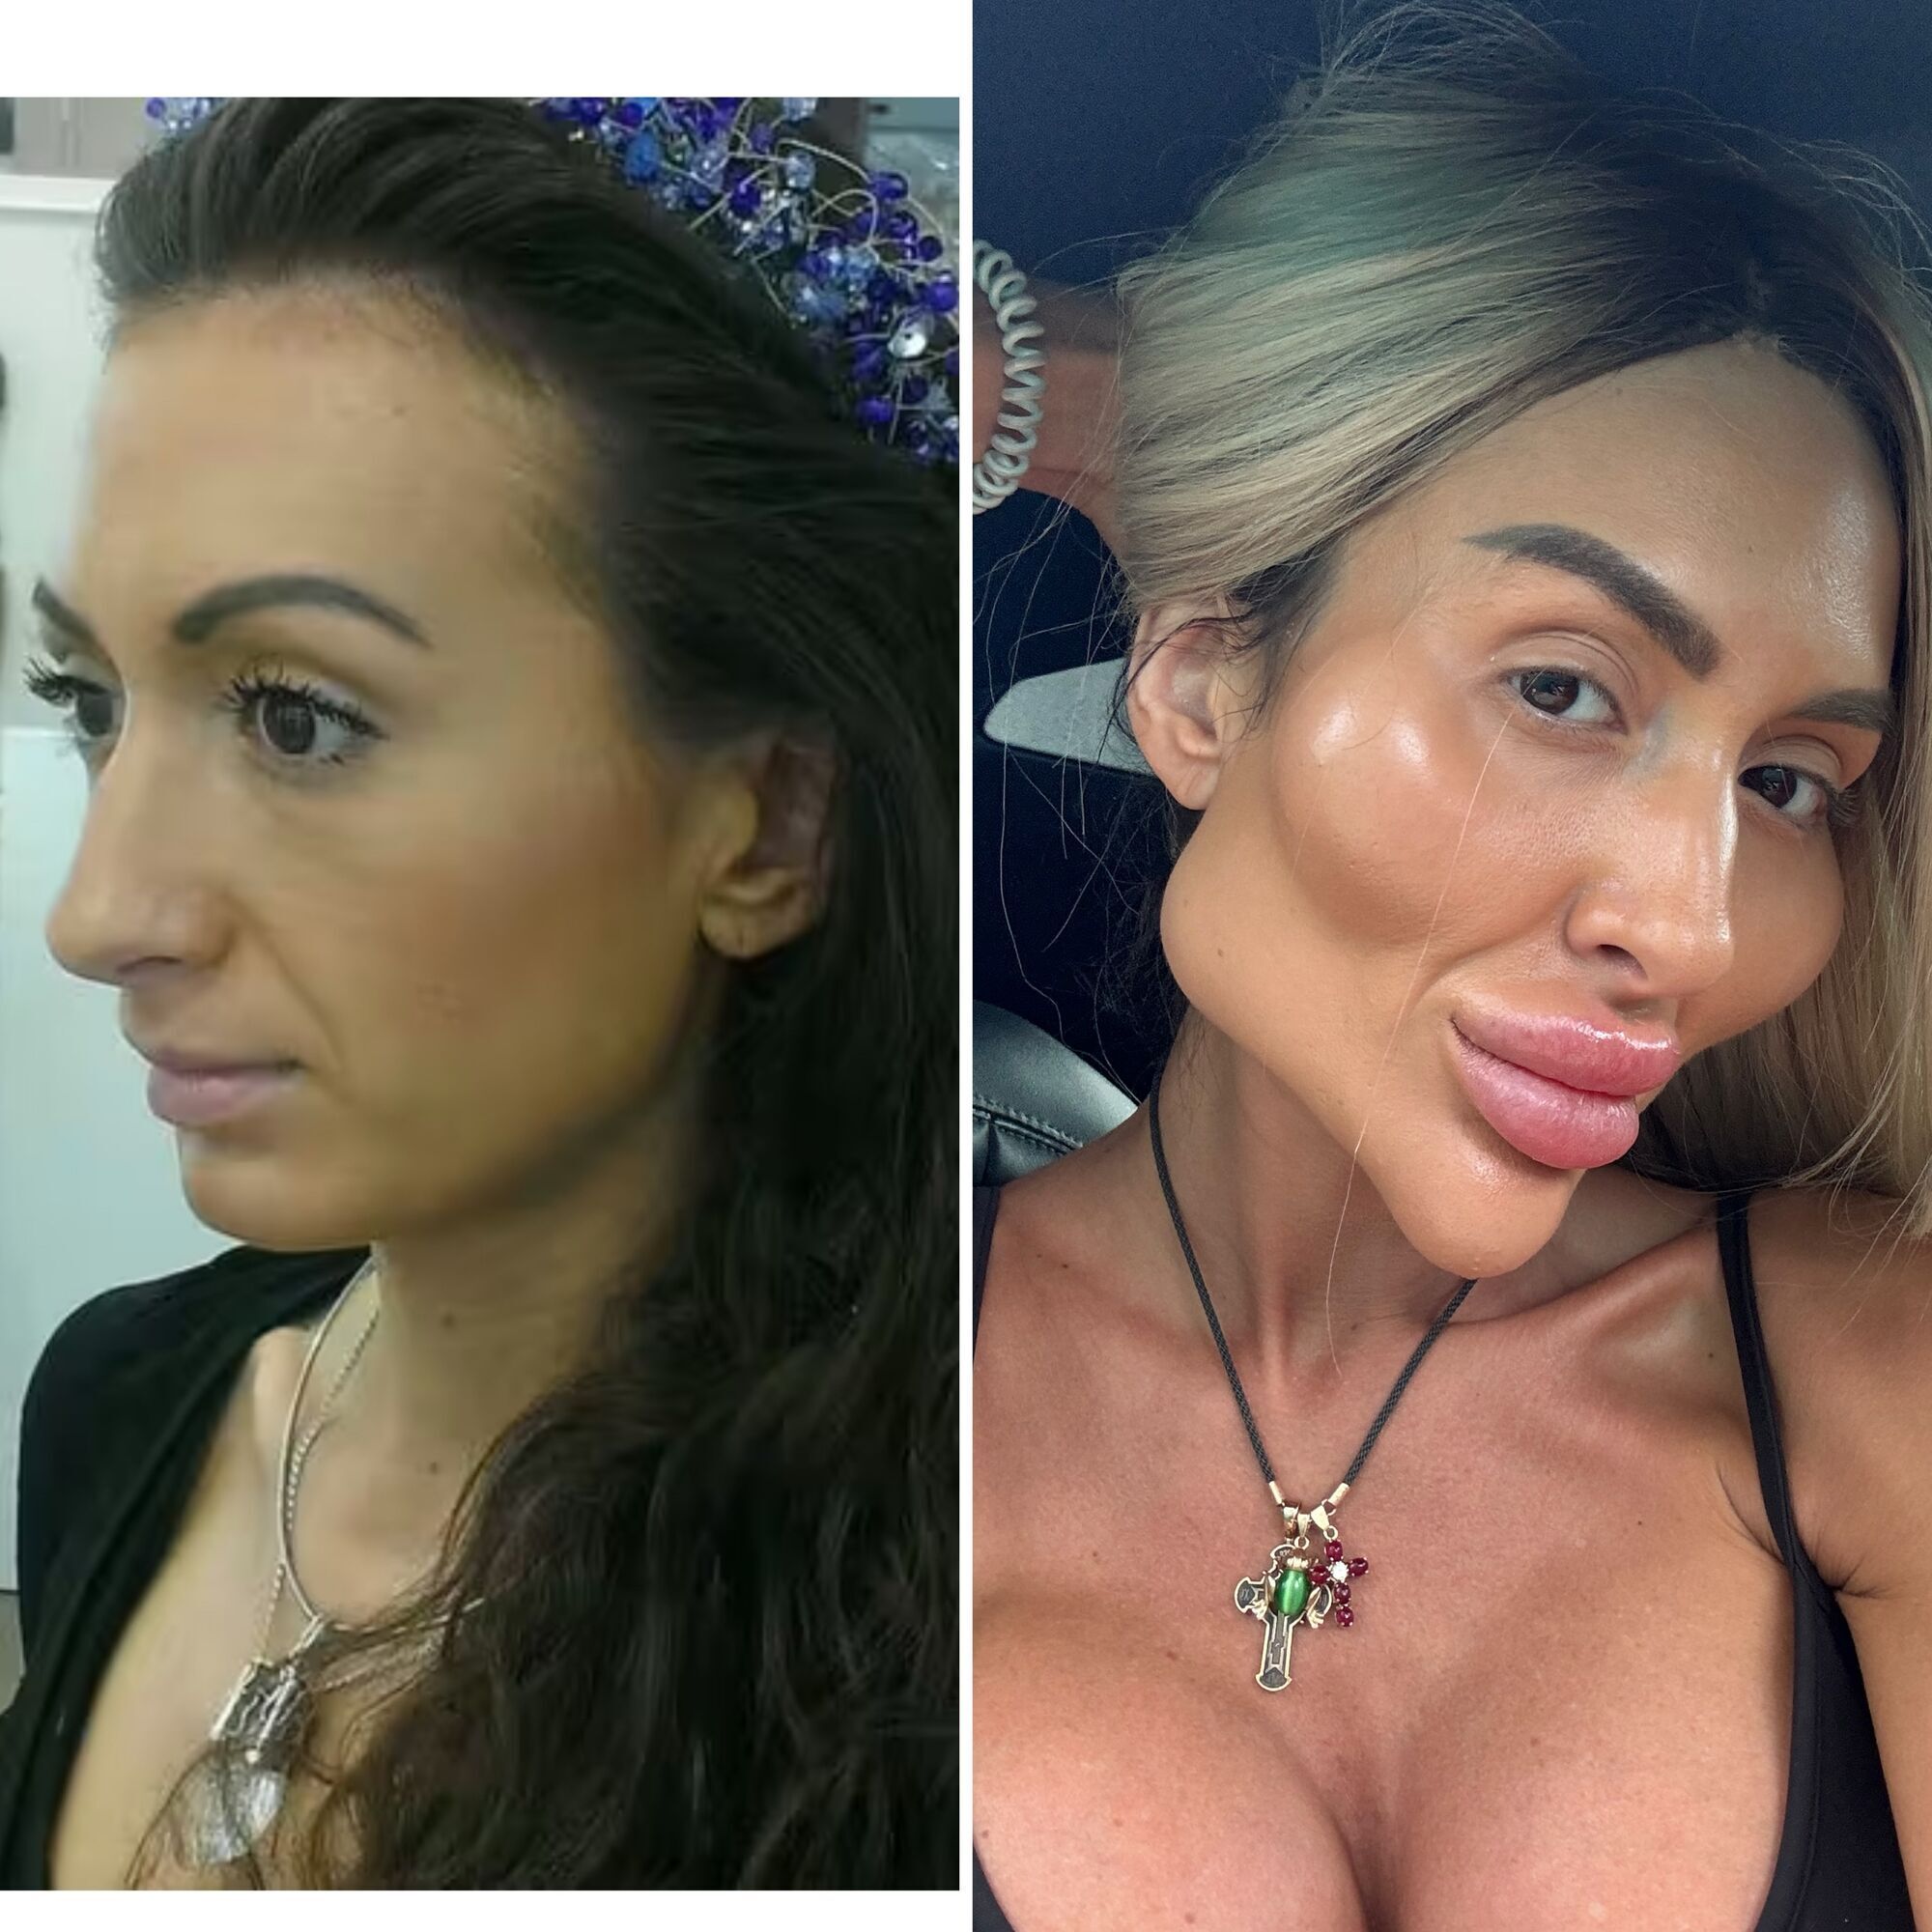 Curly hair, athletic figure: the Ukrainian with the largest cheekbones in the world showed what she looked like before her transformation. Fresh photos